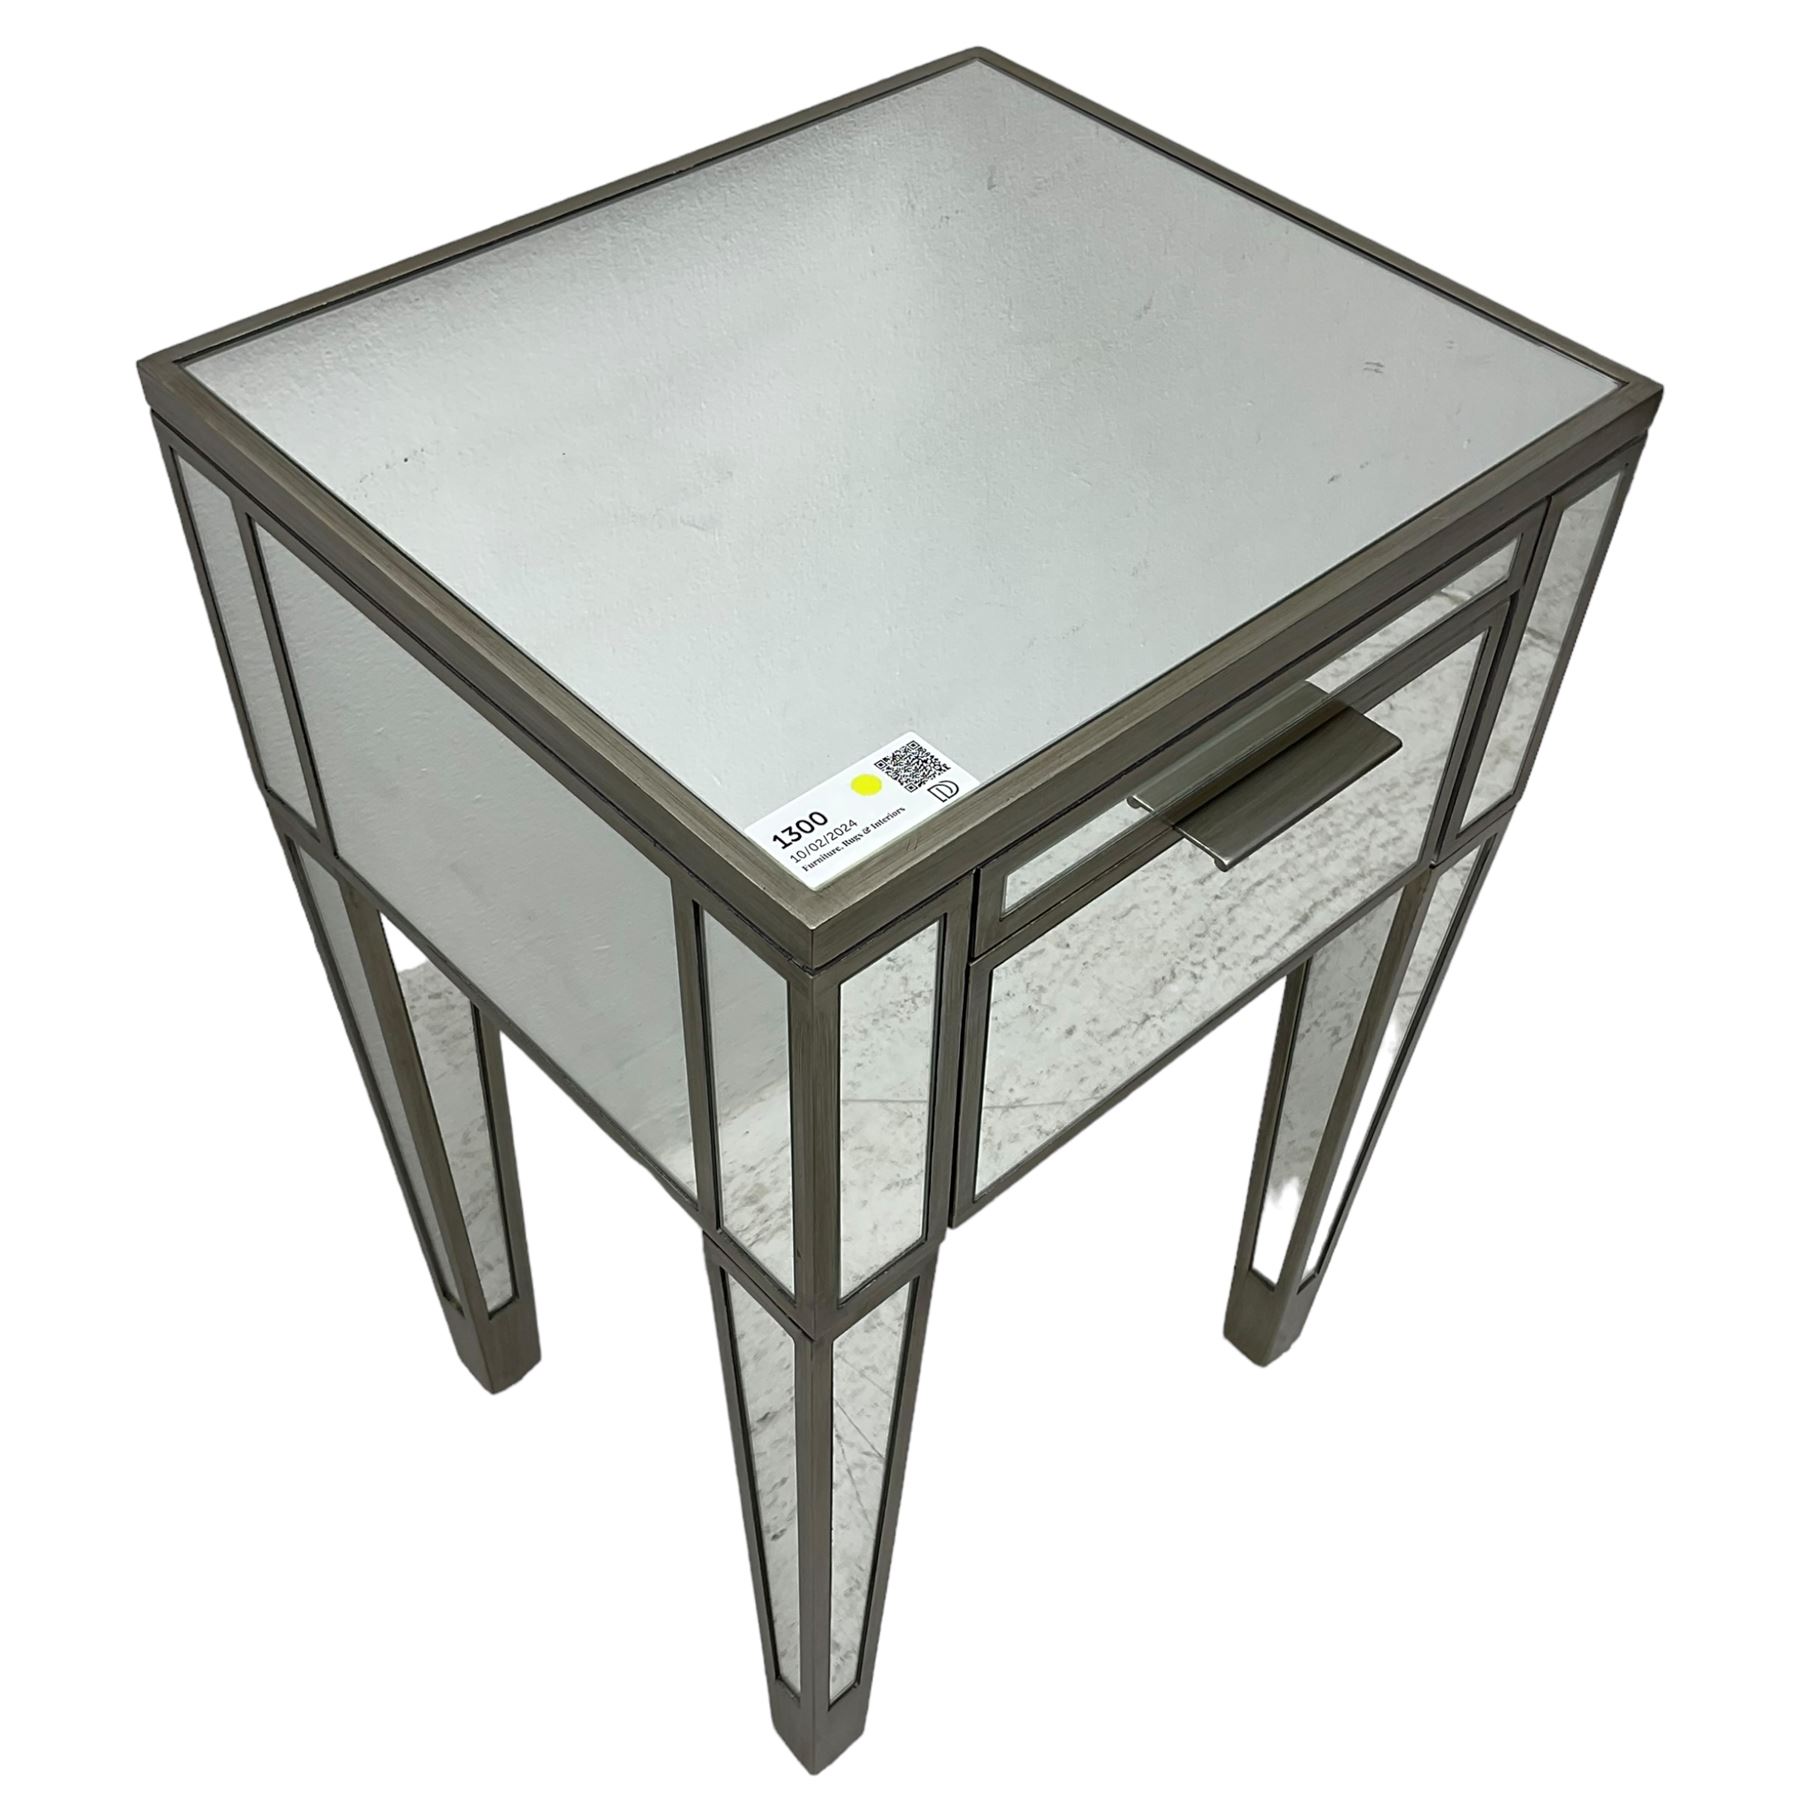 Contemporary mirrored and metal lamp table - Image 4 of 5